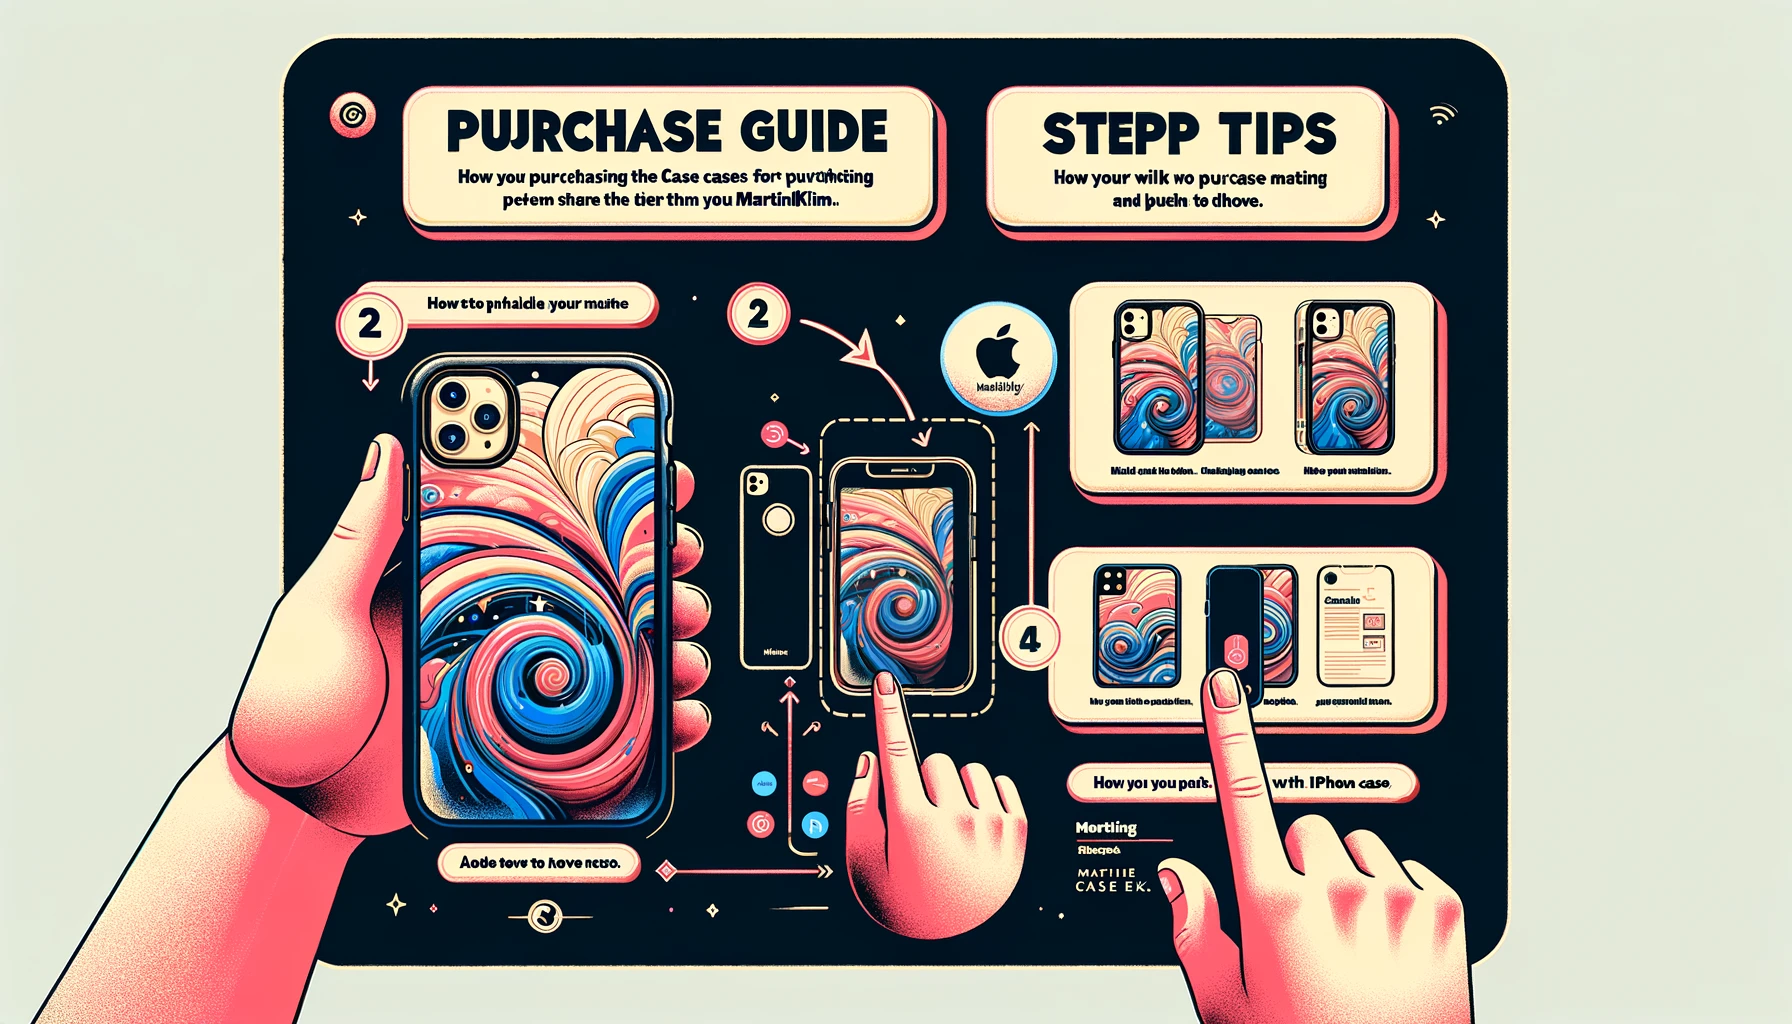 An image illustrating the purchase guide for the CASETiFY x MartinKim collaboration. Show steps or tips for purchasing the iPhone cases, with an attractive and informative design. Include the text 'CASETiFY x MartinKim' prominently in the image.